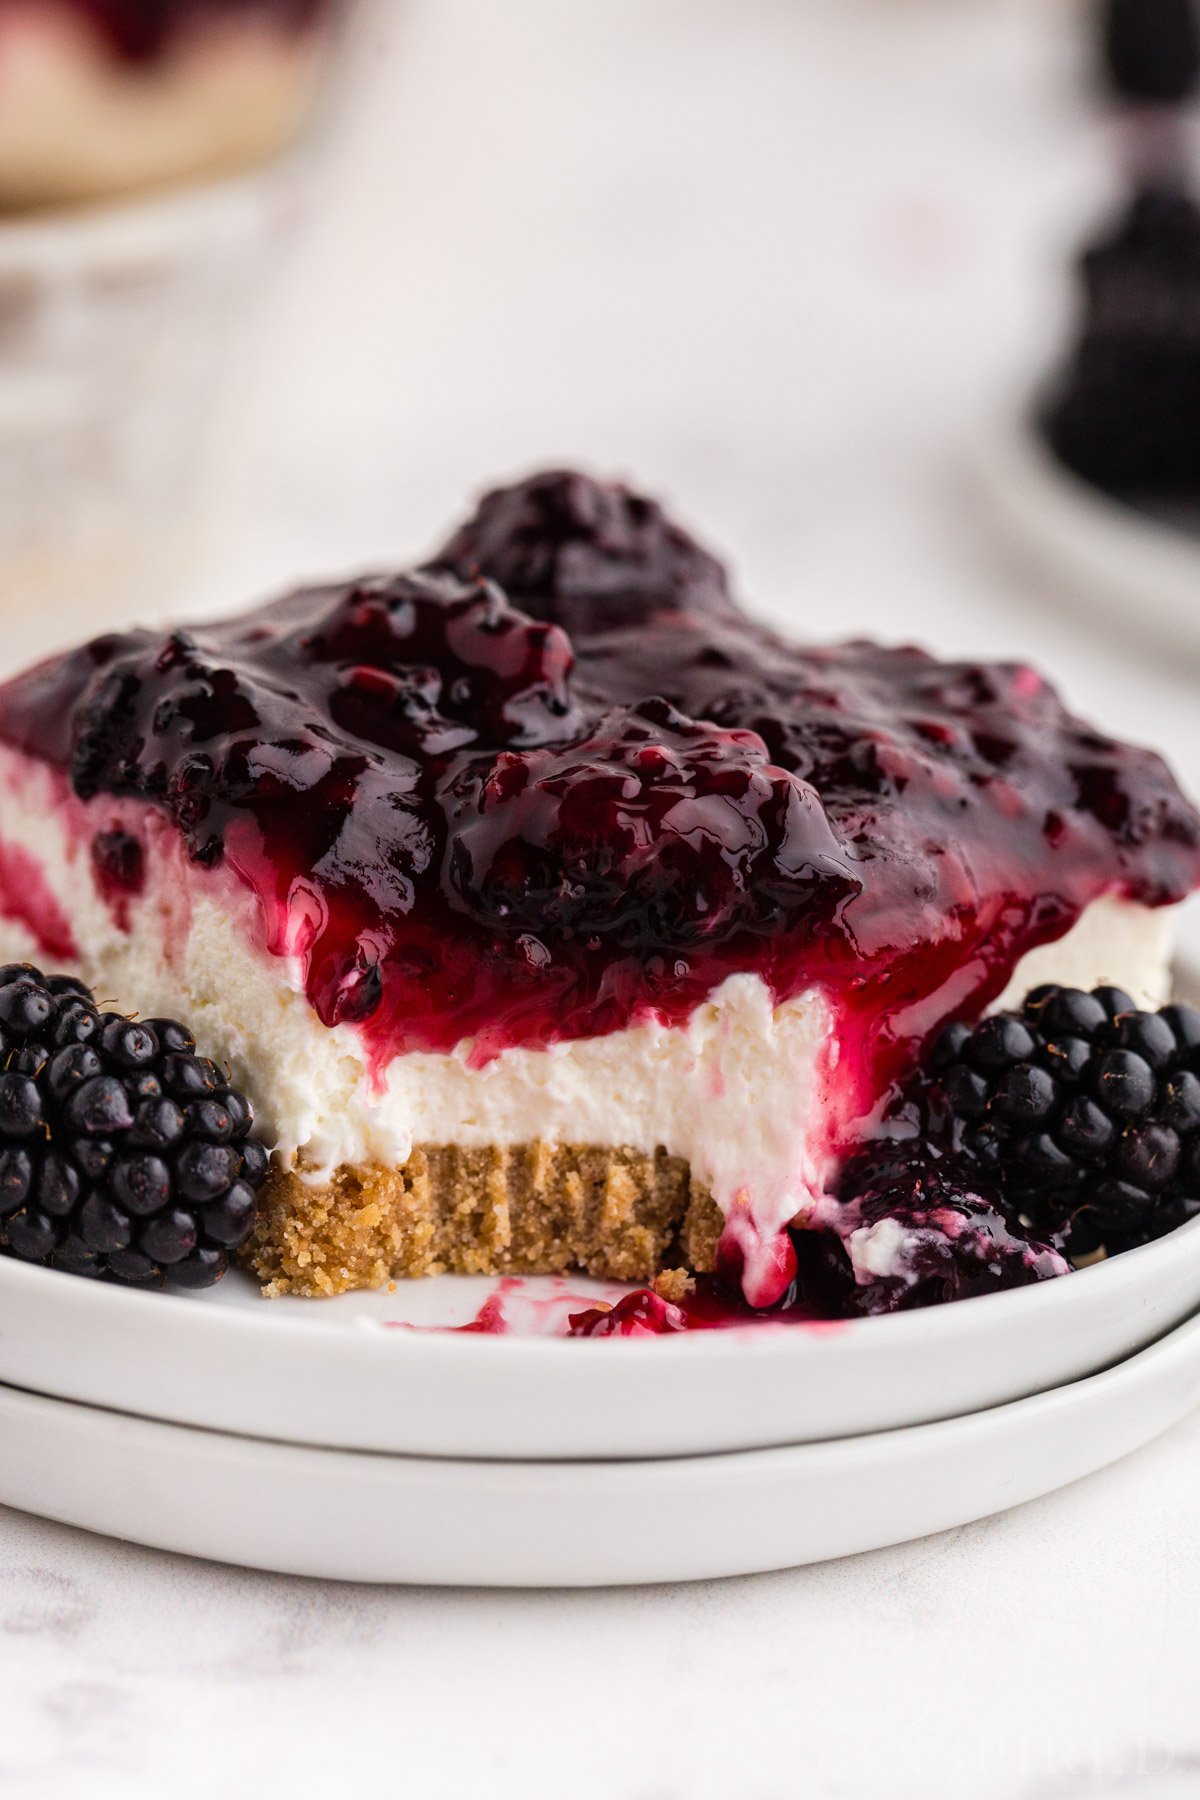 Pressure Cooker Blackberry Cheesecake (Or Any Fruit) - This Old Gal